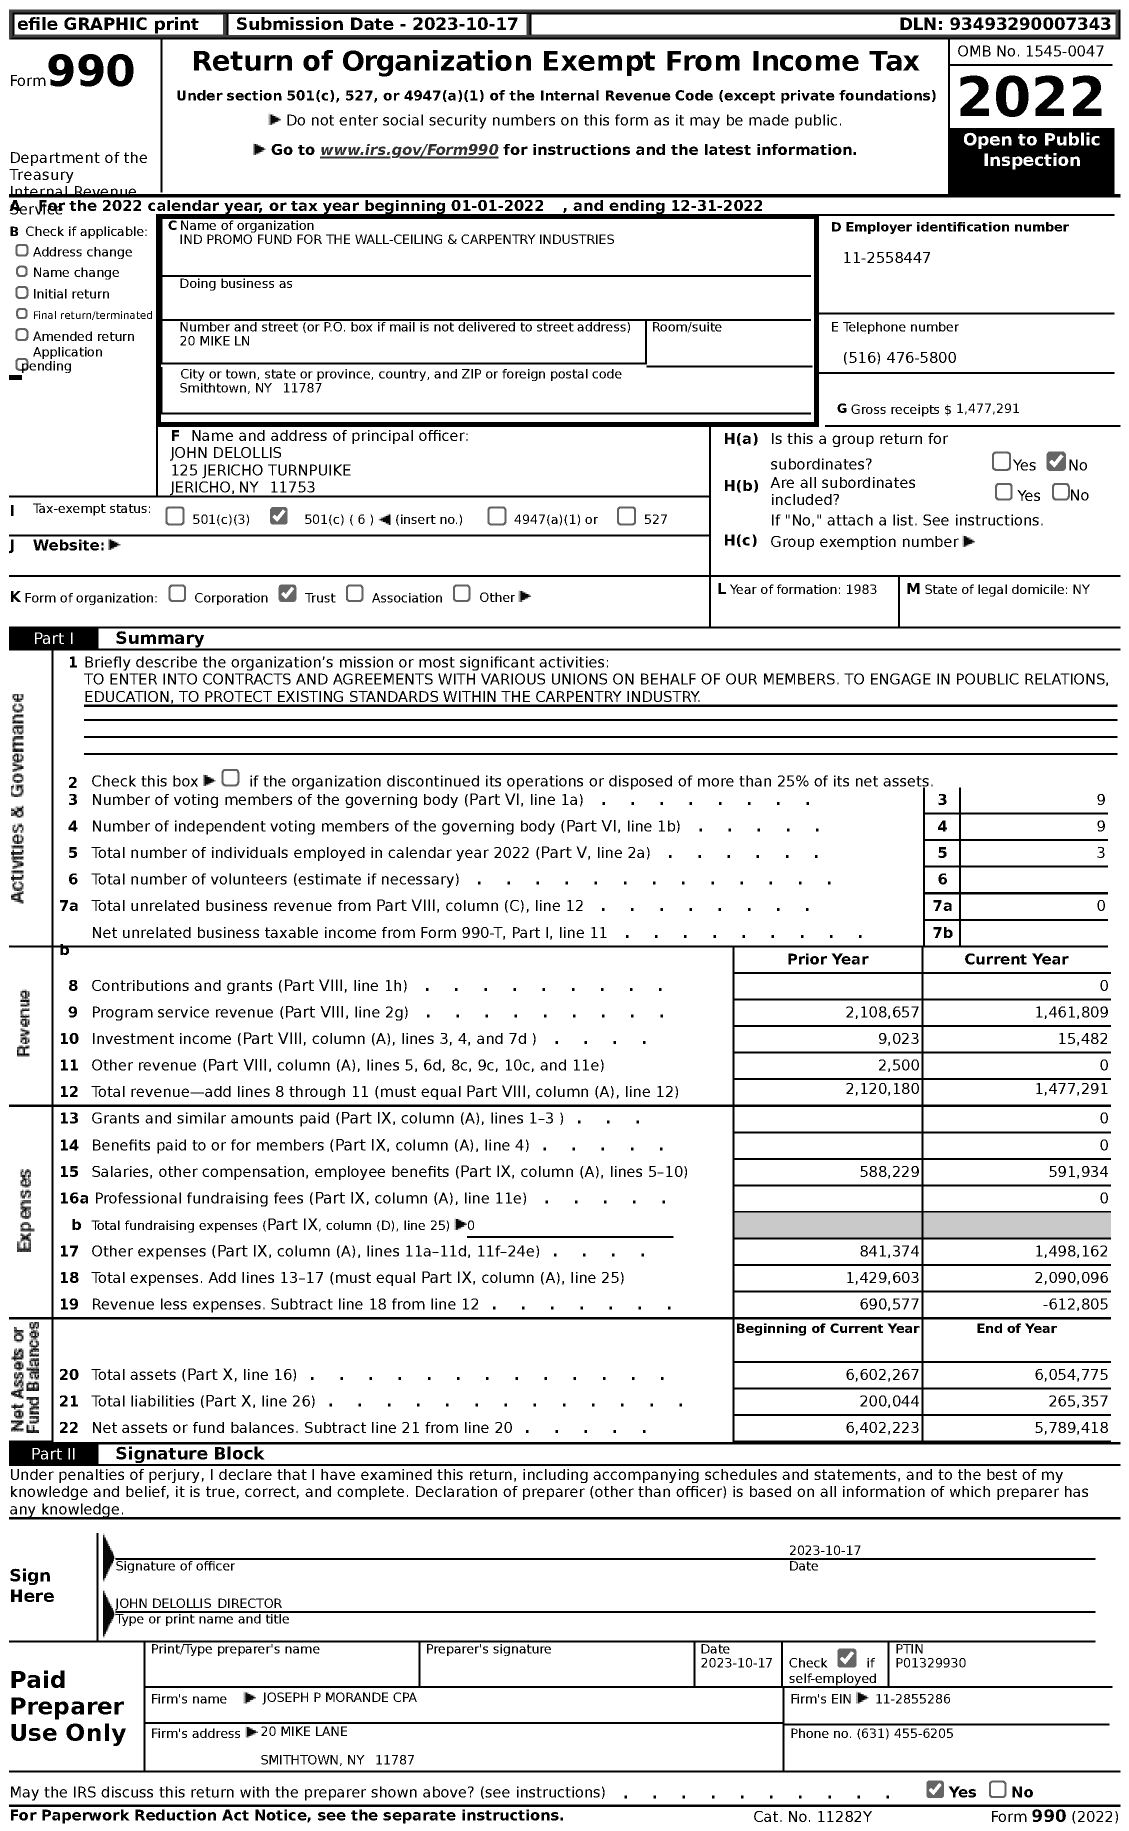 Image of first page of 2022 Form 990 for Industry Promotional Fund for the Wall Ceiling & Carpentry Industry